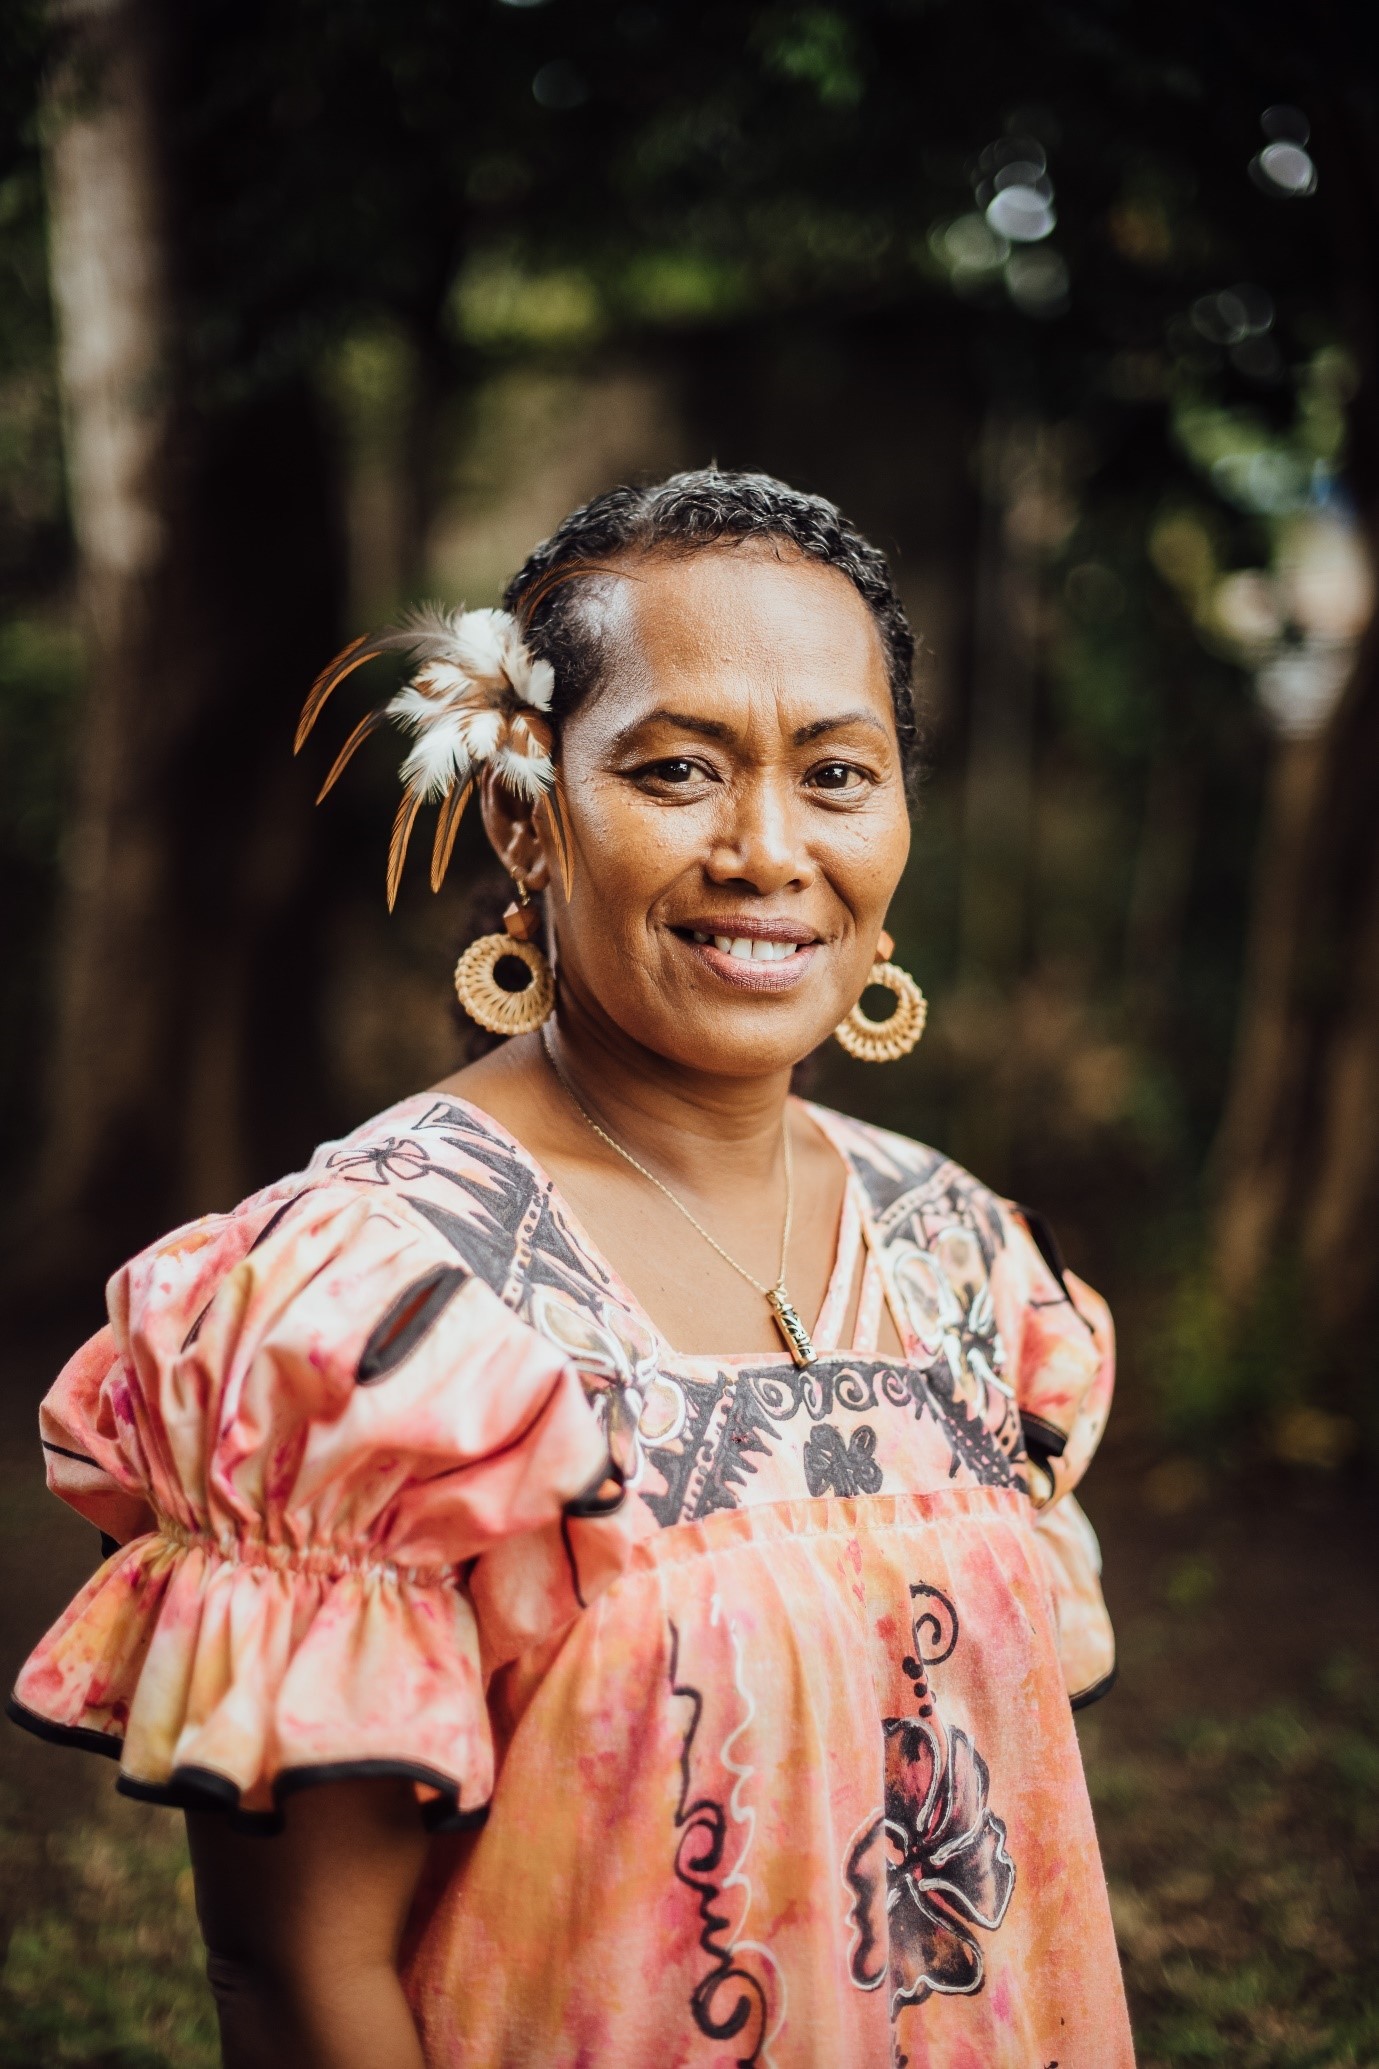 Using a manual sewing machine, Feby makes traditional colorful dresses that are popular among inhabitants of Vanuatu island, and a key part of the local fashion economy.